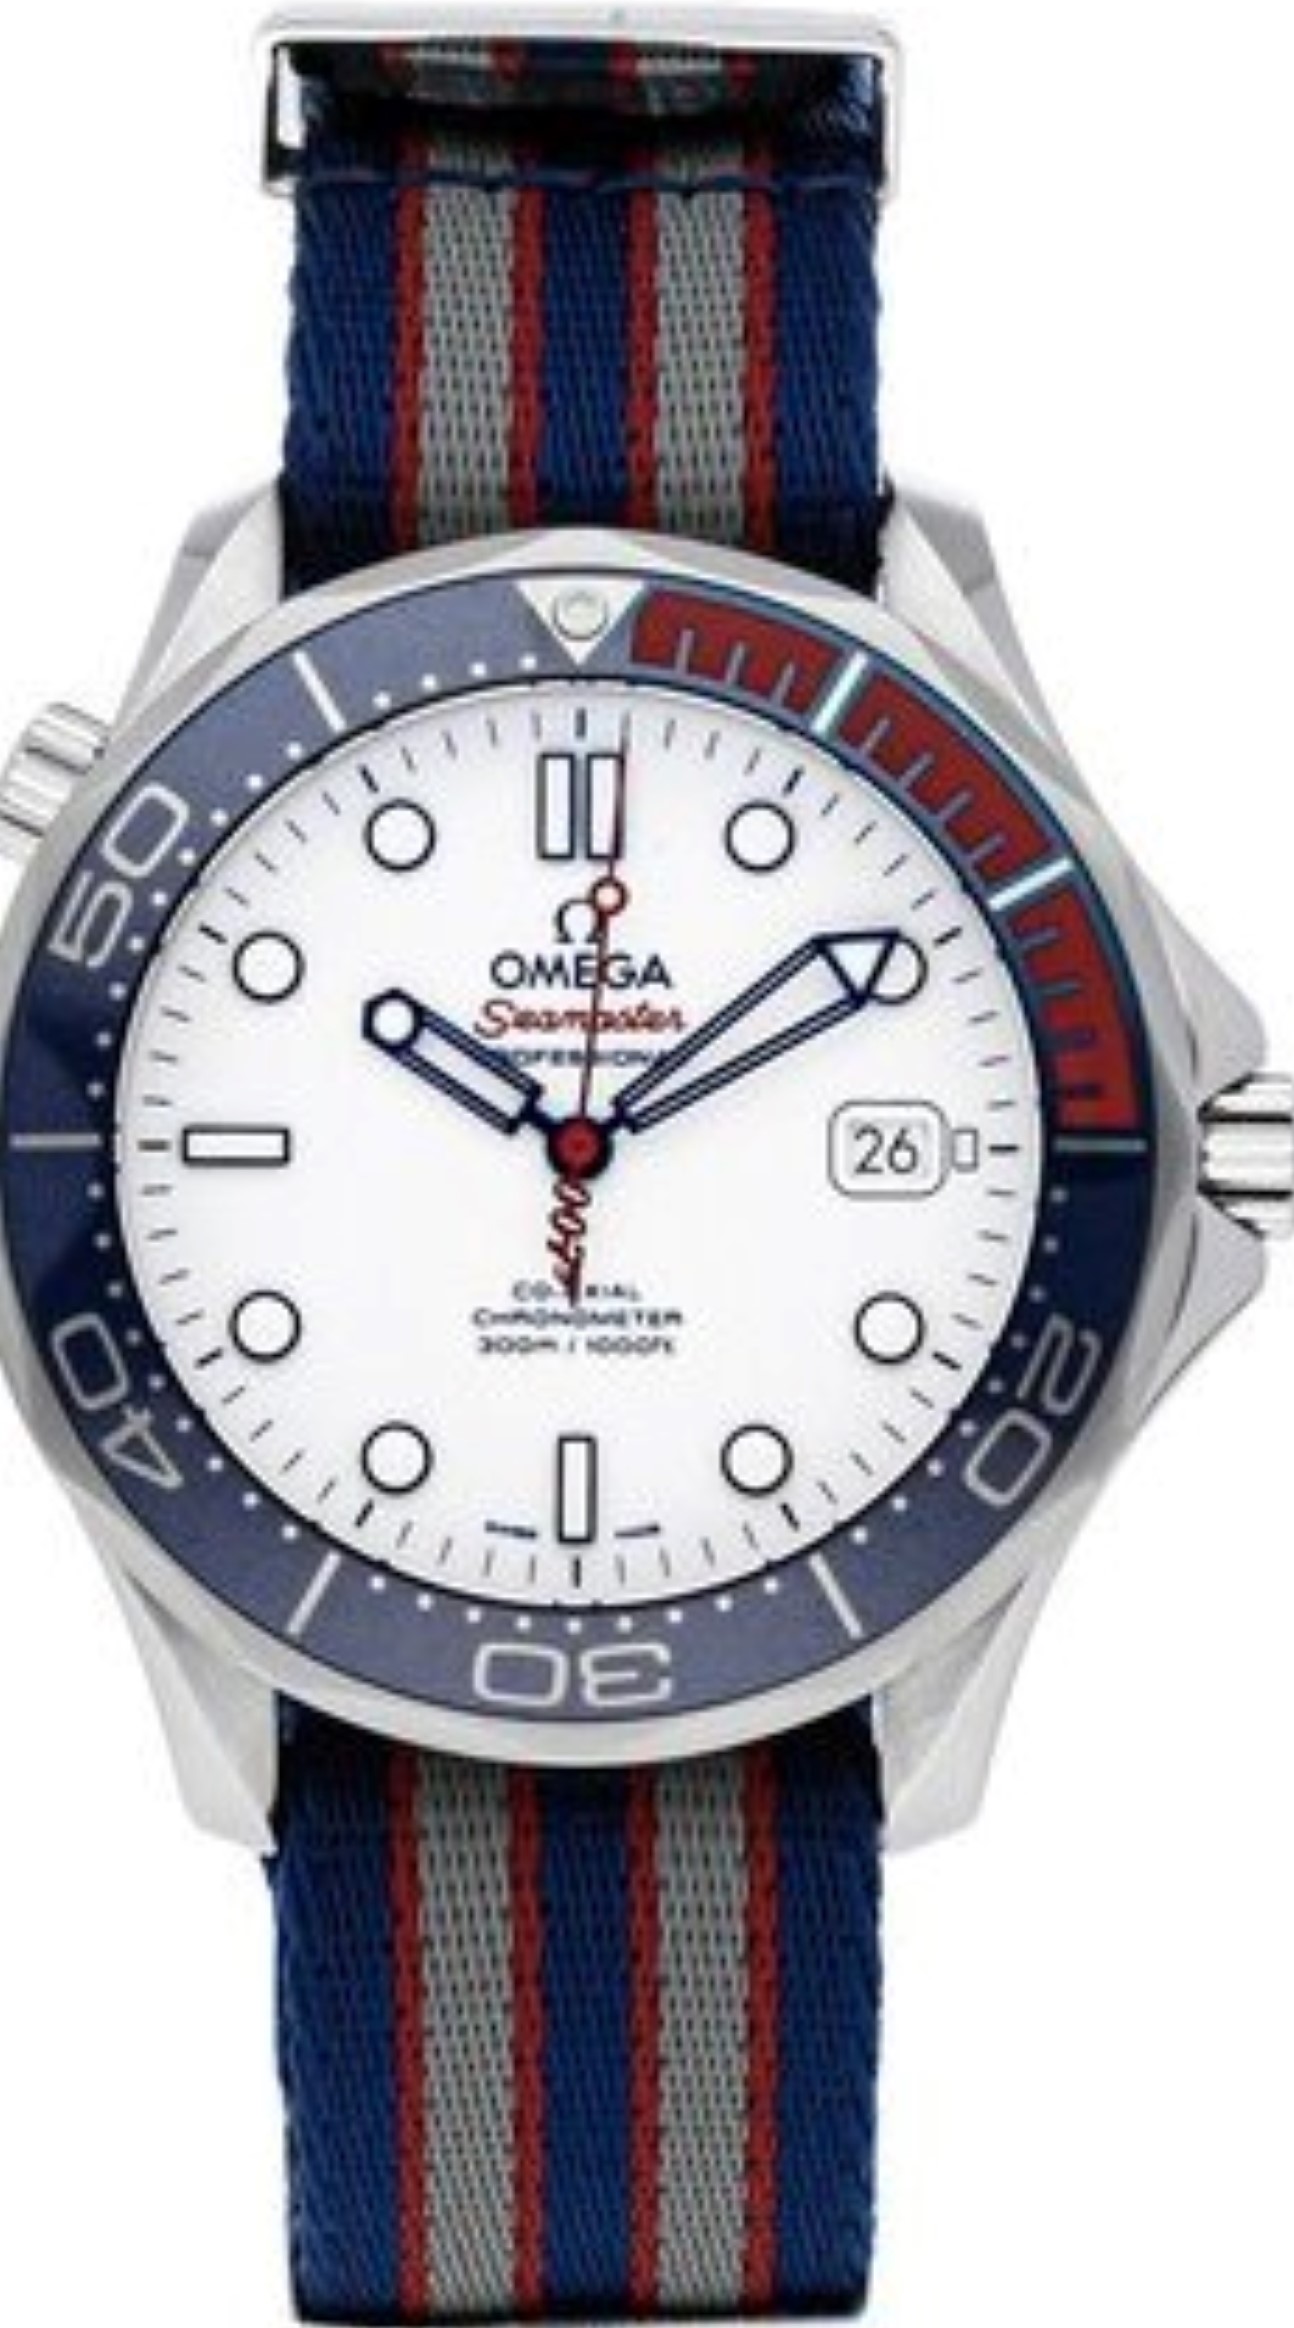 OMEGA SEAMASTER DIVER 300M CO-AXIAL CHRONOMETER 41MM, COMMANDER'S WATCH "007", STEEL ON NATO STRAP, REF: 212.32.41.20.04.001